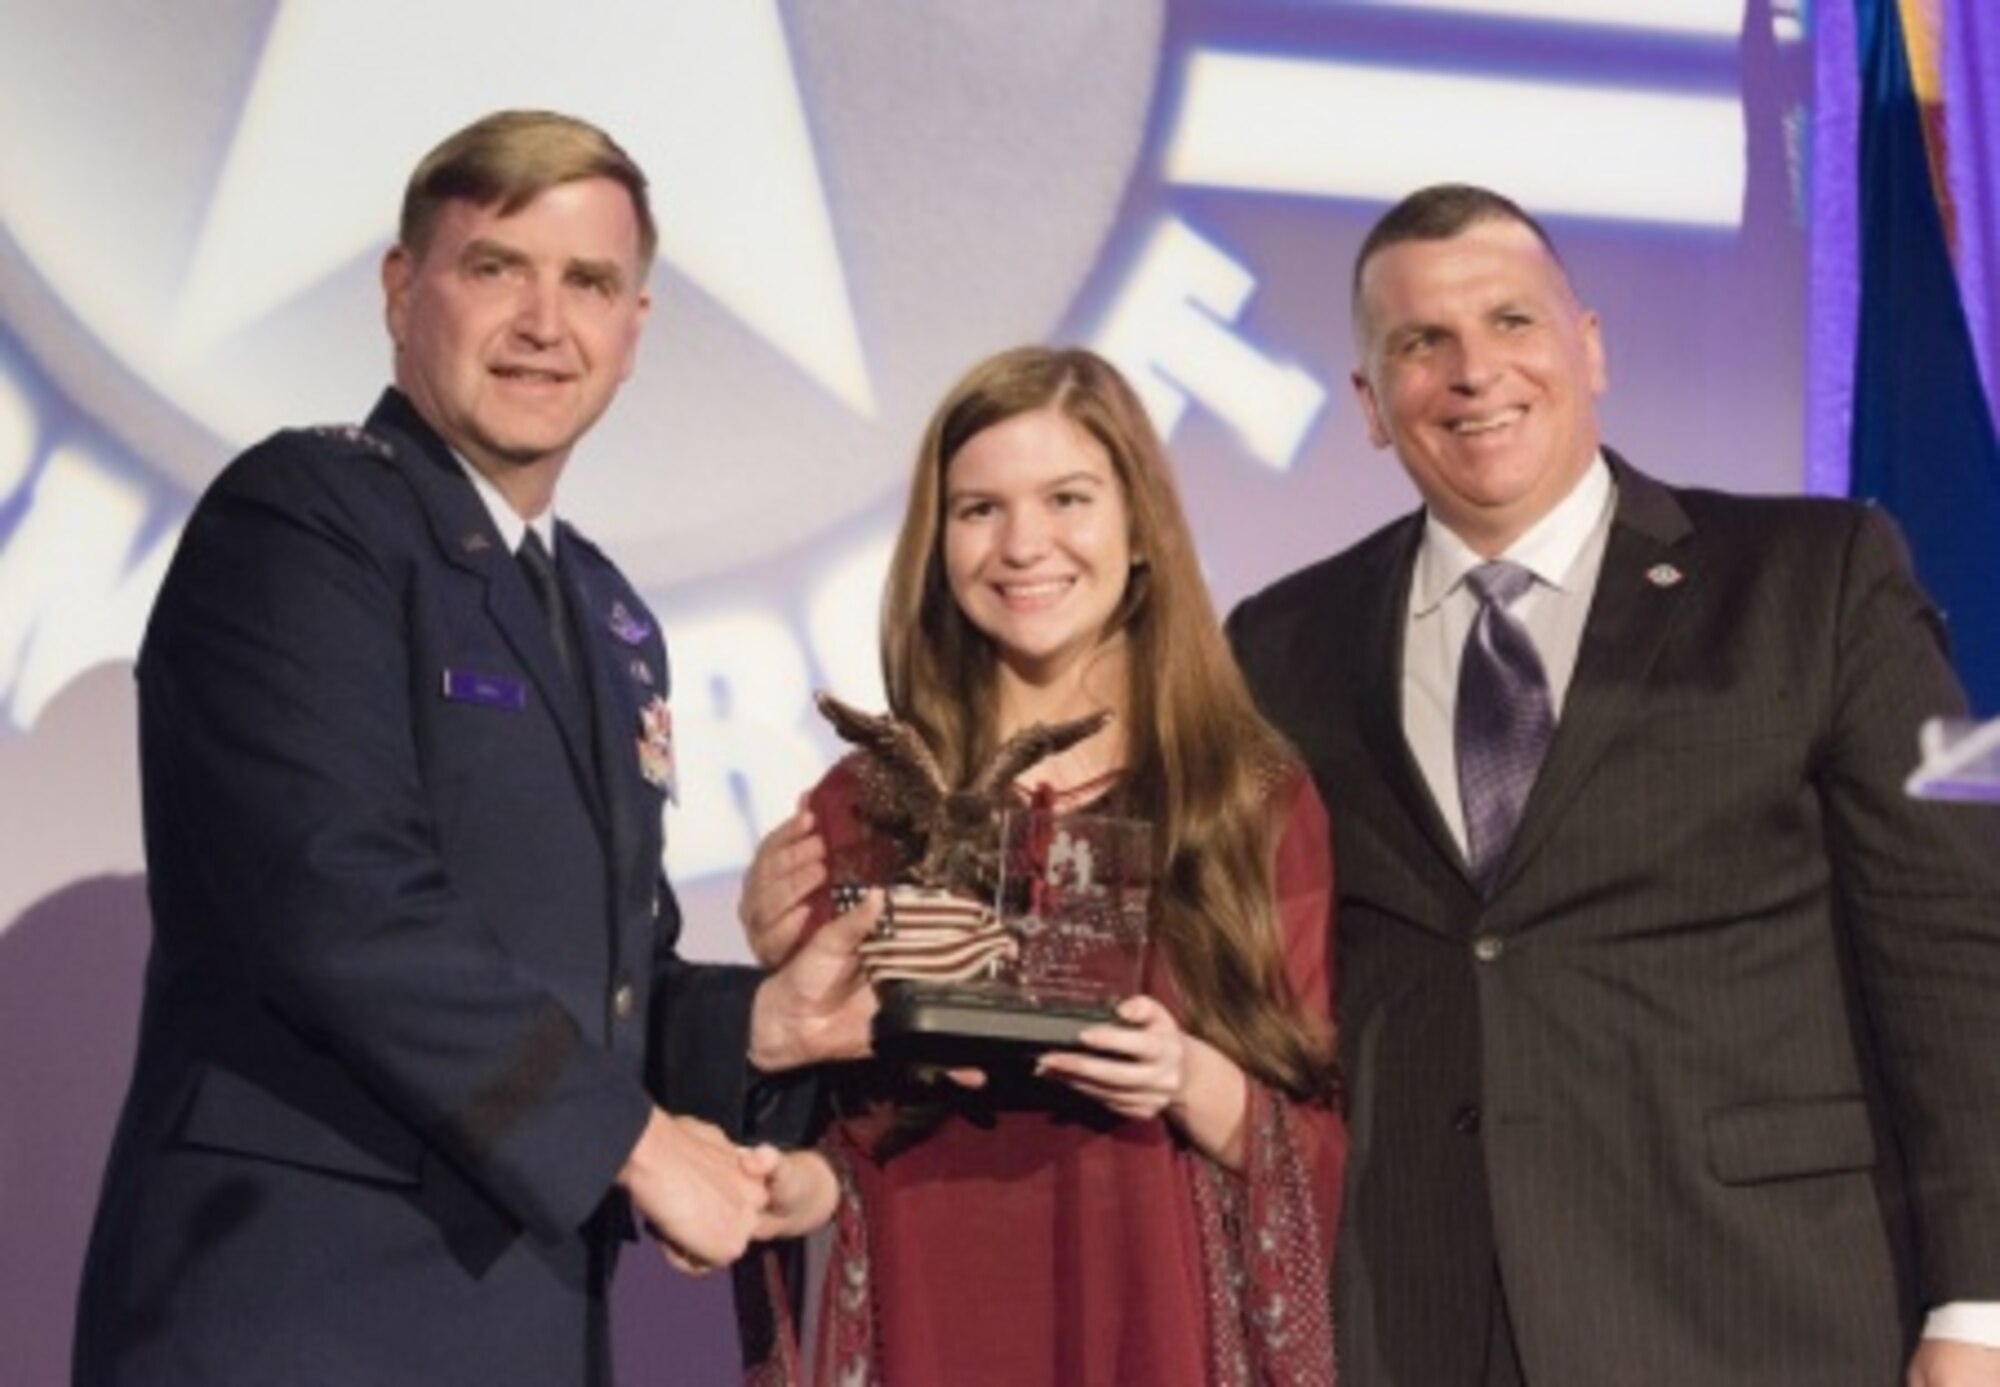 Lt. Gen. Stephen L. Hoog, Assistant Vice Chief of Staff and Director of Air Staff at U.S. Air Force Headquarters, and Operation Homefront president Tim Farrell present Air Force Child of the Year nominee Sarah Francesca Hesterman with a trophy during the 2015 Military Child of the Year Awards Gala, in Arlington, Va., April 16, 2015. The awards gala is held to recognize outstanding military children - one nominated for each of the service branches. (DoD photo by Army Staff Sgt. Sean K. Harp/Released)